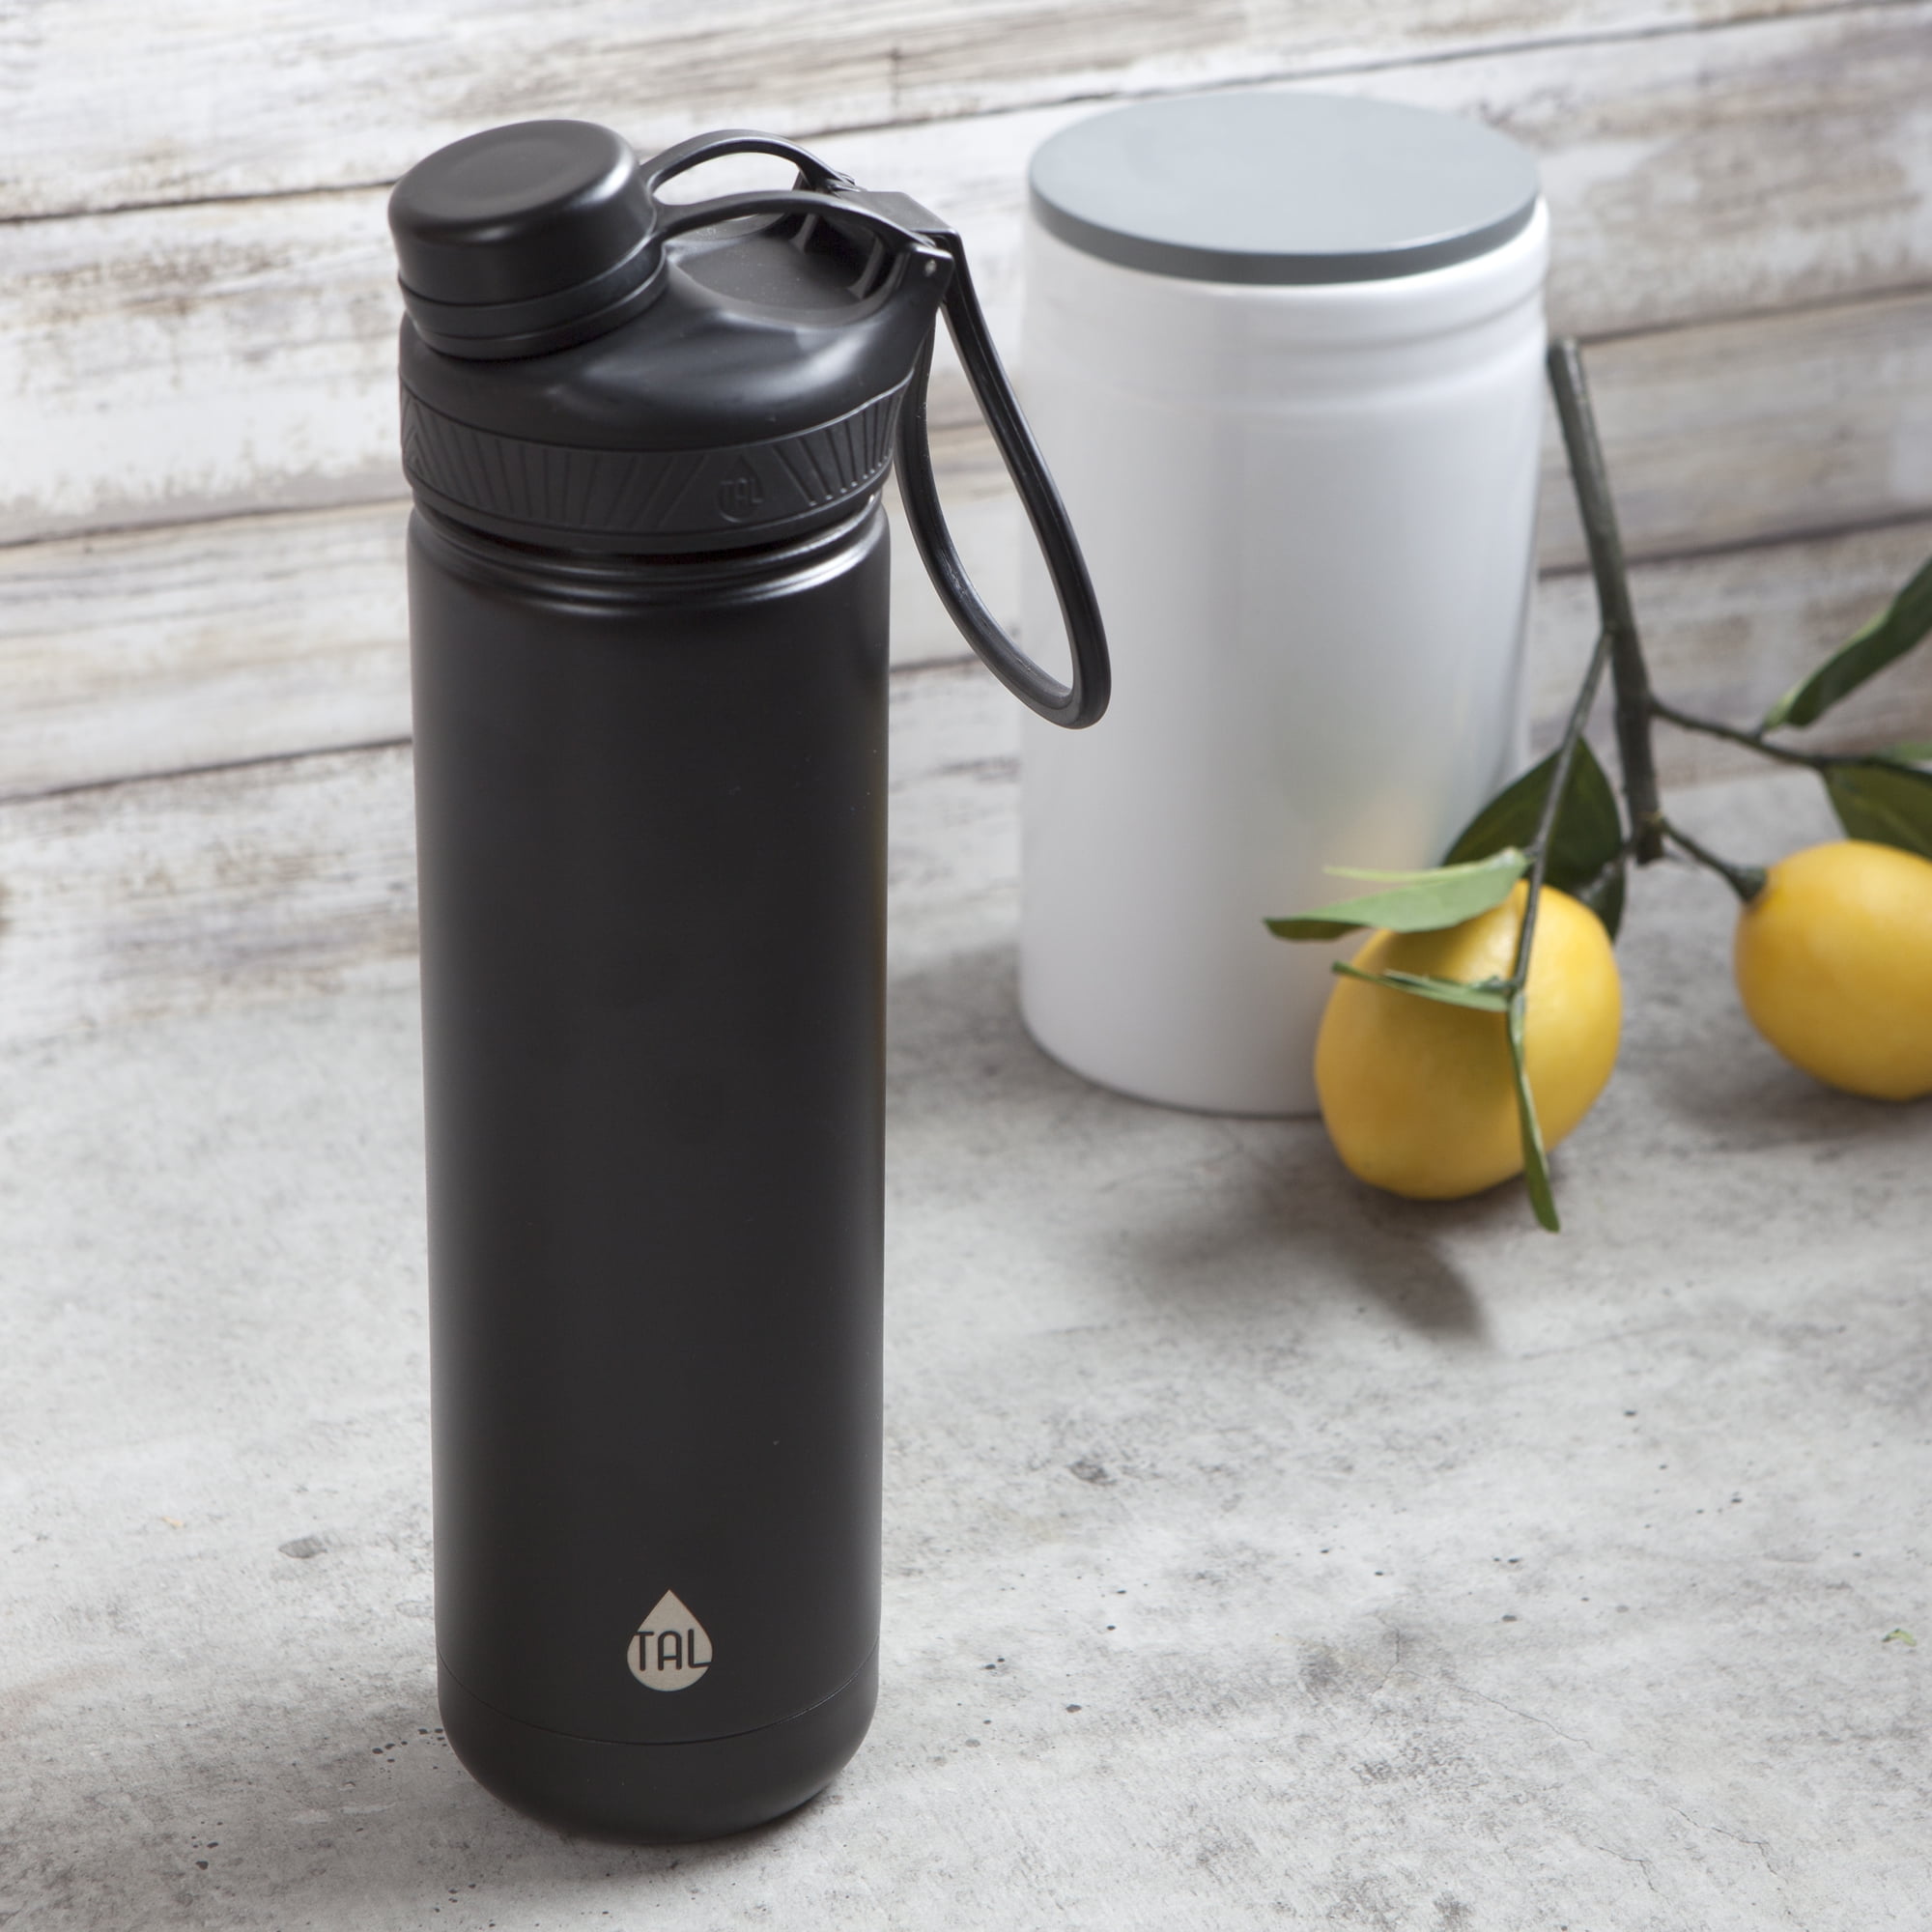 Sports Stainless Steel Insulated Water Bottle 26 oz Black&Navy, Black